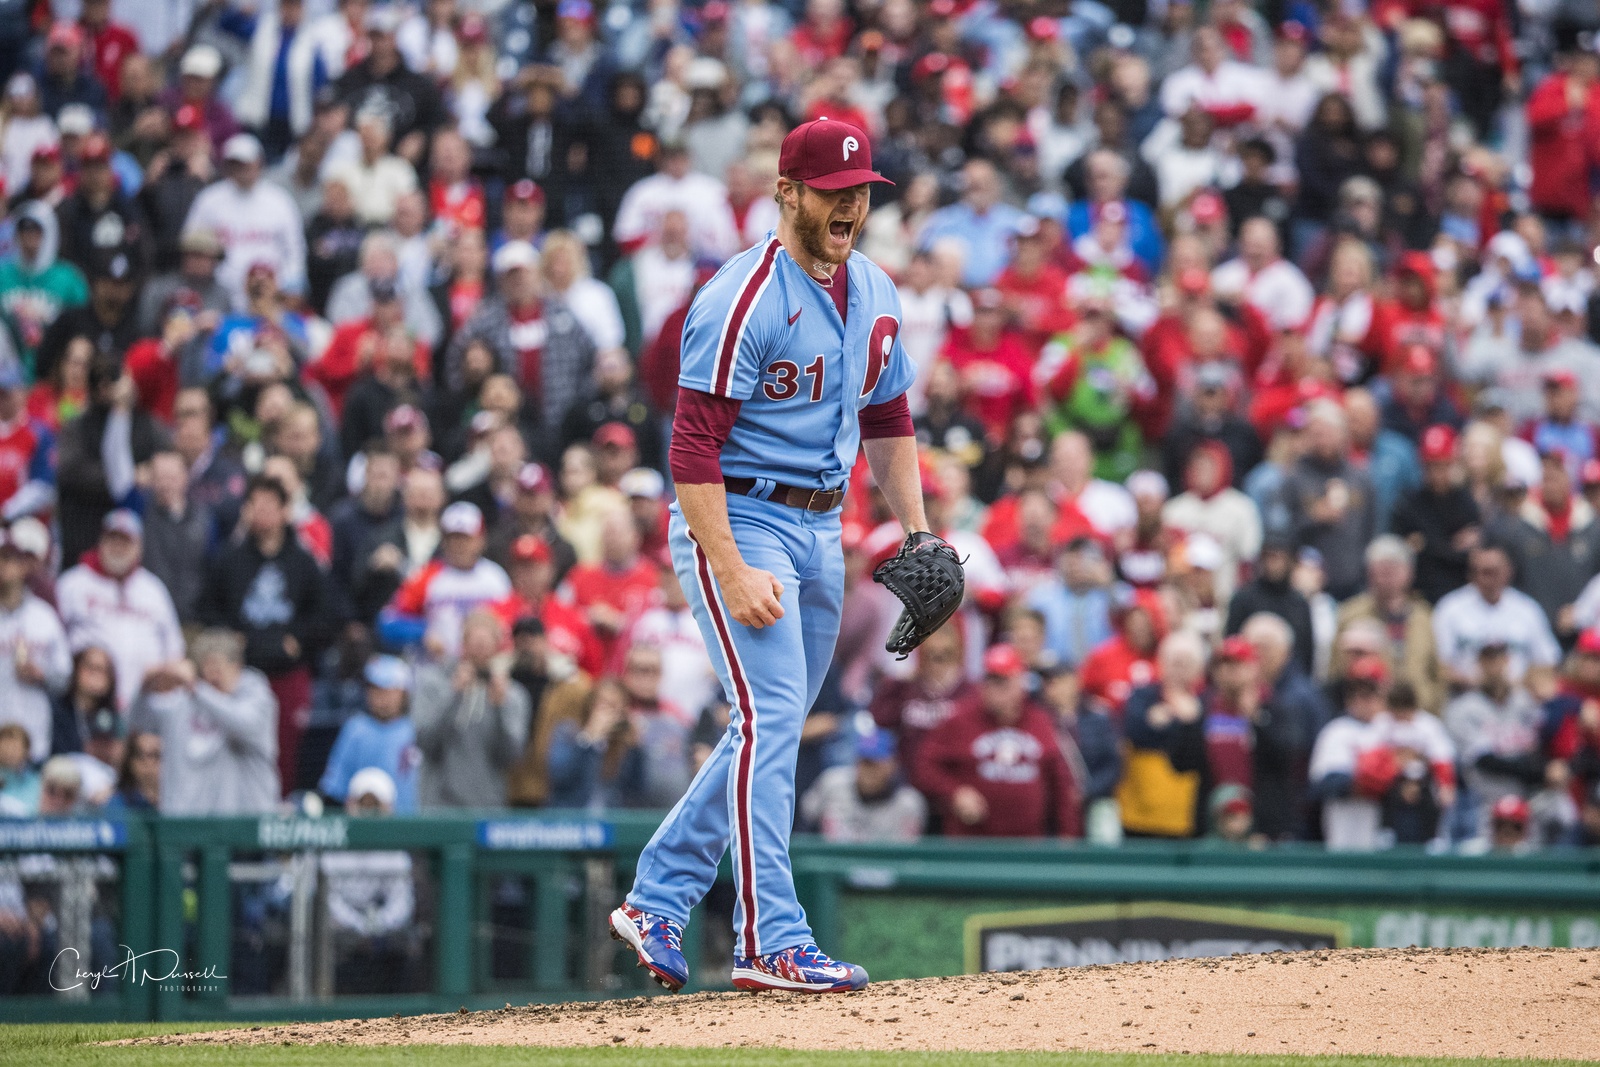 Kimbrel 8th pitcher in MLB history to earn 400 saves, Phillies beat